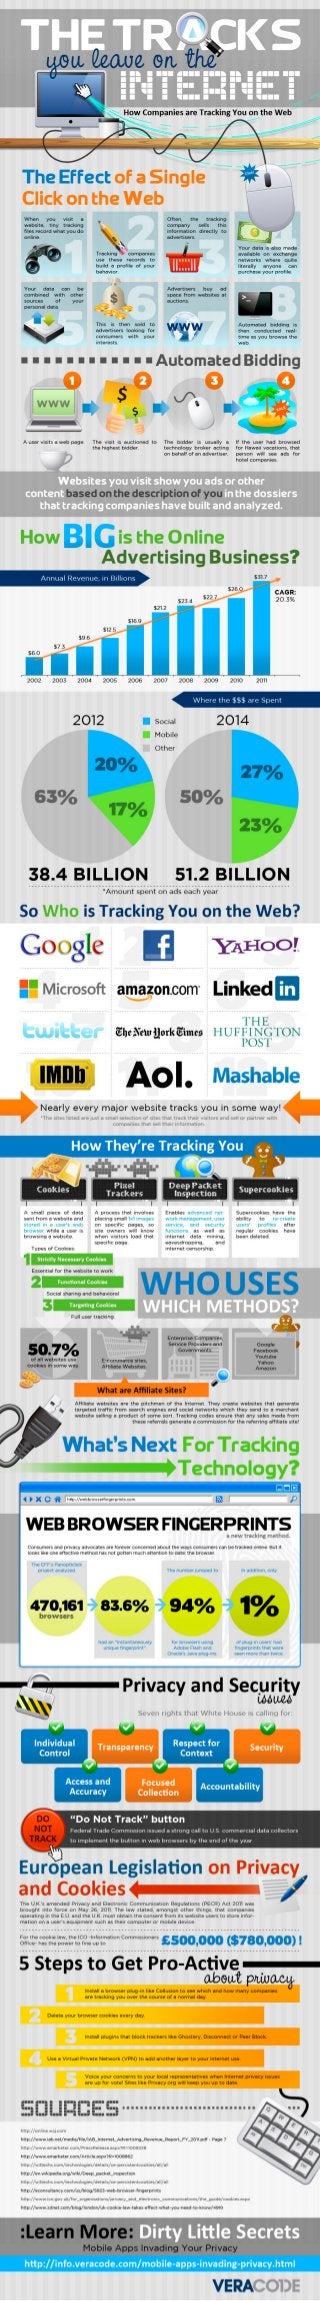 How Companies Track You on the Web- Infographic